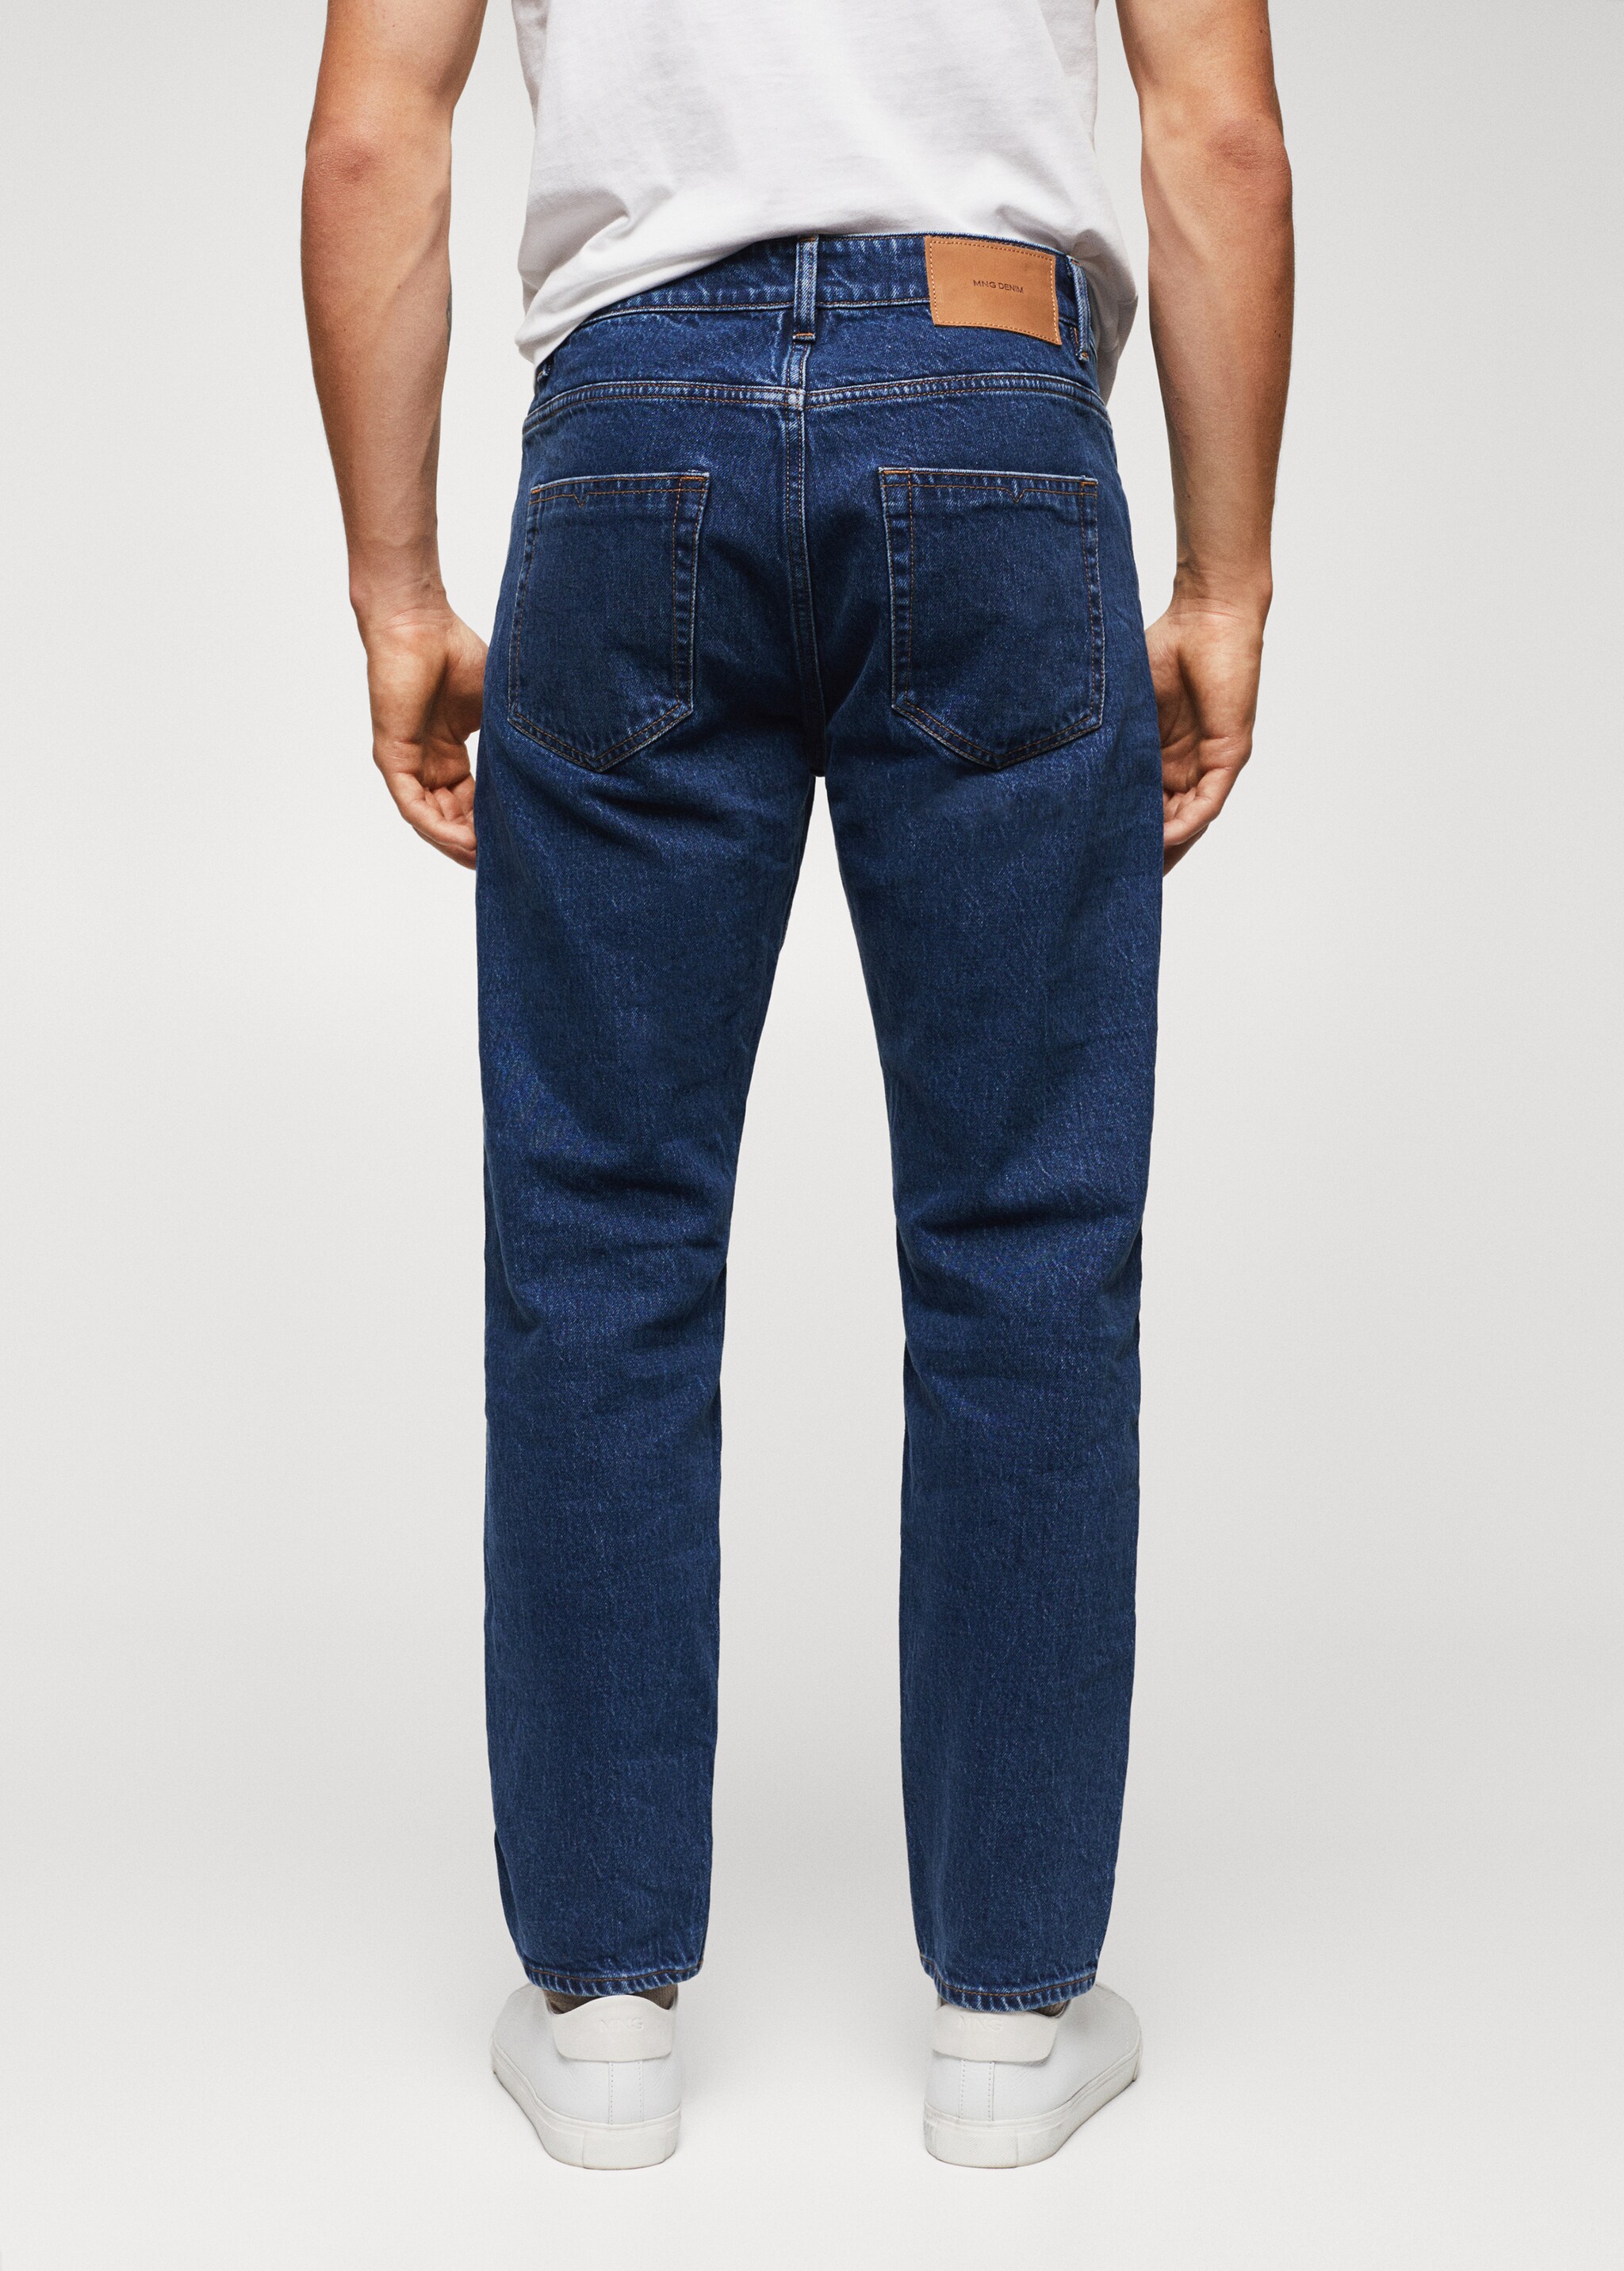 Jeans Ben tapered cropped - Reverso del artículo